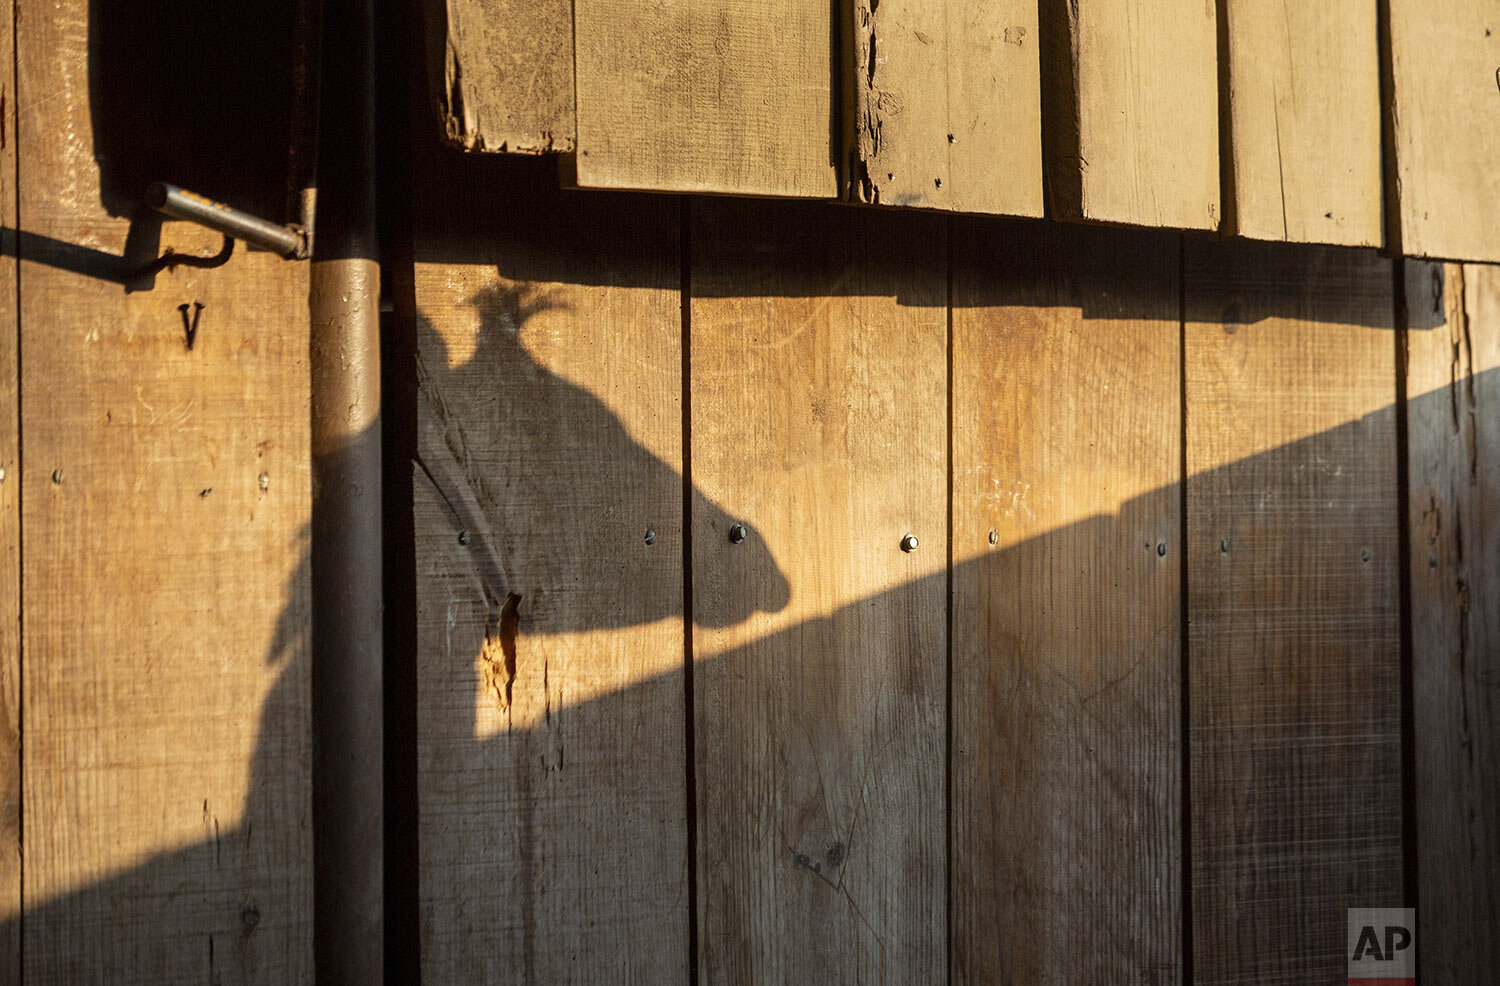  The shadow of Fito, a six-month-old giraffe born in captivity, stands inside his enclosure at La Aurora Zoo which is closed amid measures to contain the spread of the new coronavirus in Guatemala City, March 31, 2020. (AP Photo/Moises Castillo) 